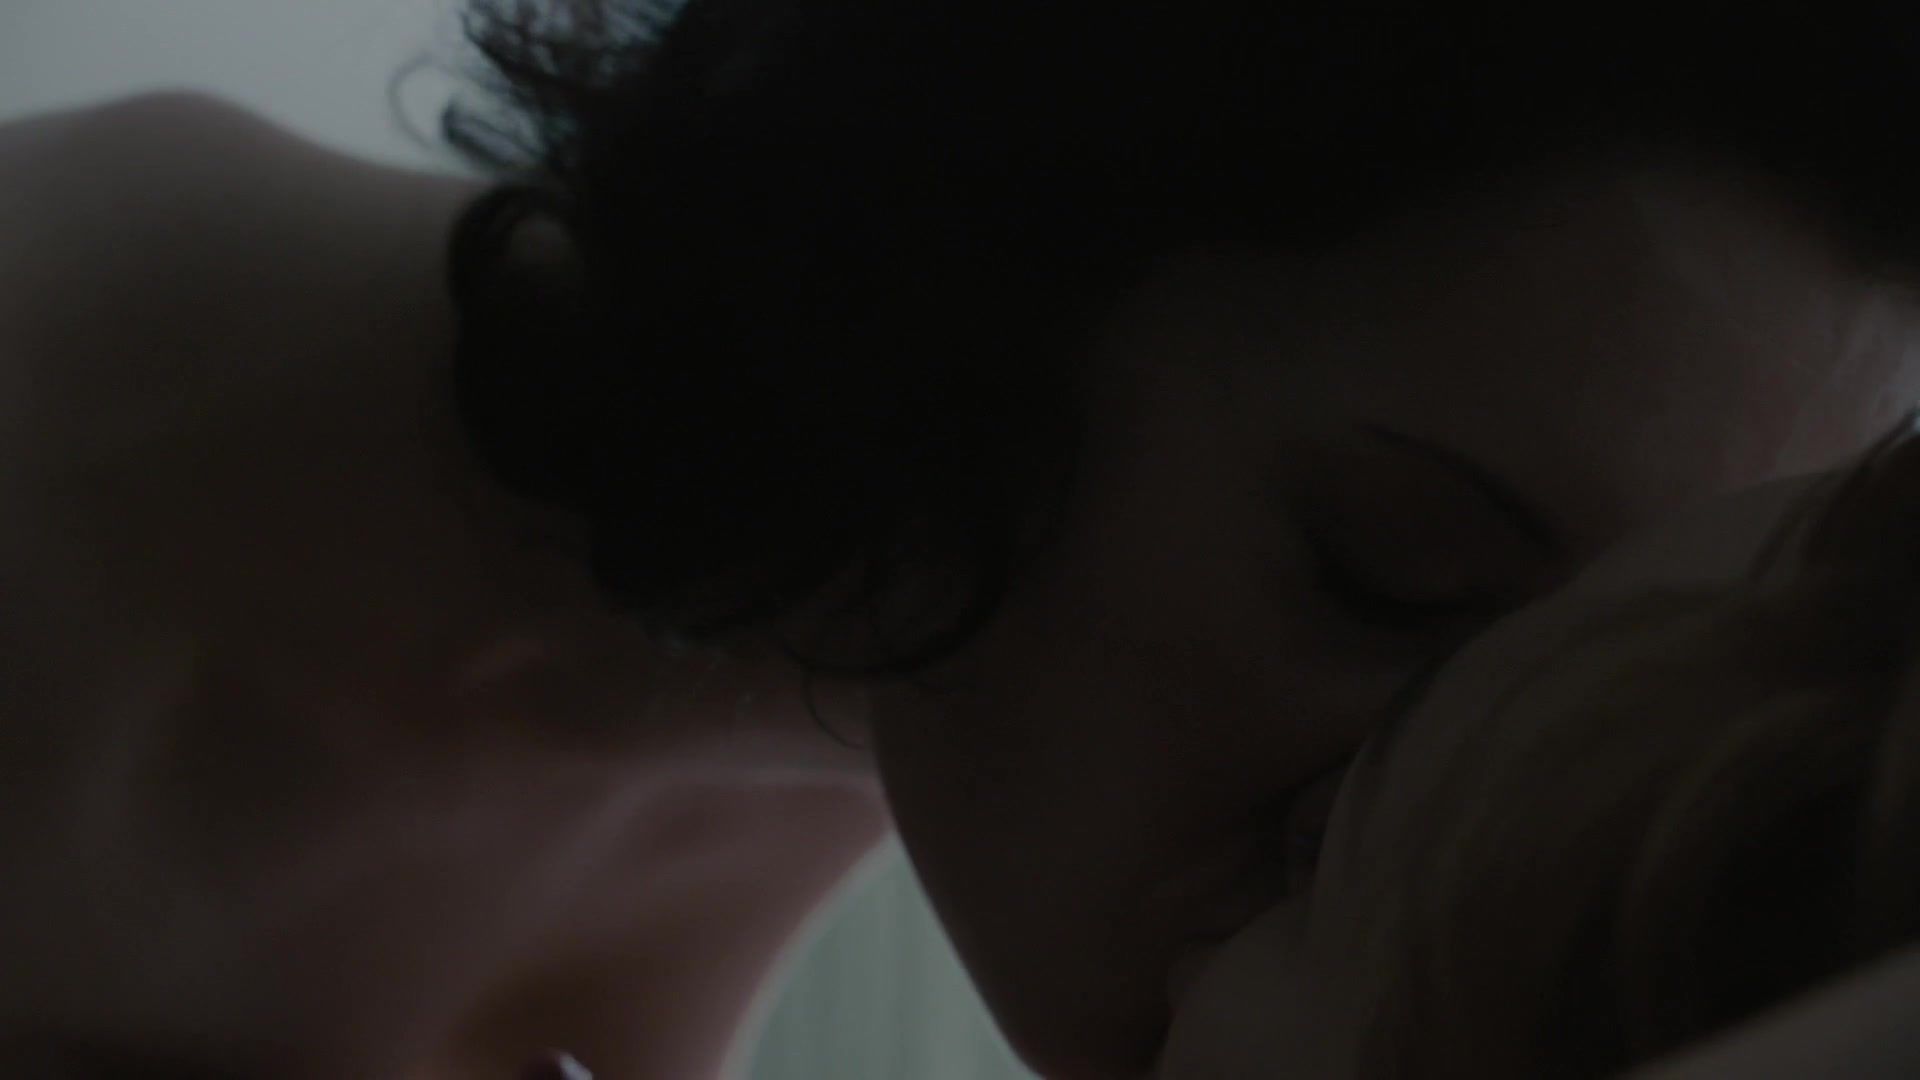 Big Booty Louisa Krause, Anna Friel Nude - The Girlfriend Experience s02e03 (2017) Penis Sucking - 2